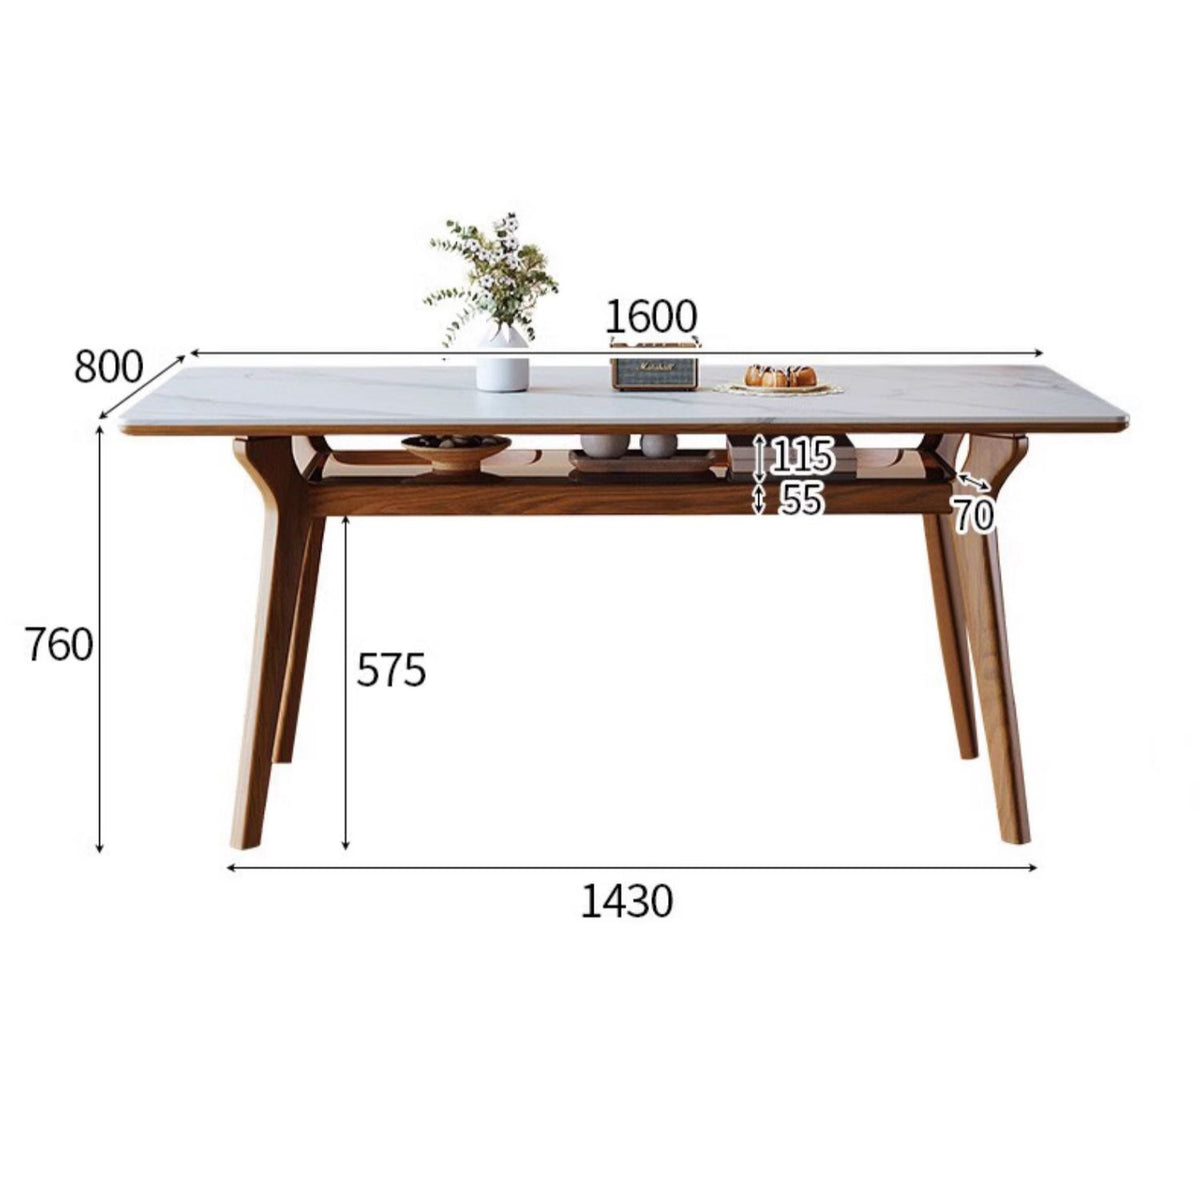 Elegant Brown Frame Table with Natural Sintered Stone and Glass Top, Ash Wood Design fmbs-010